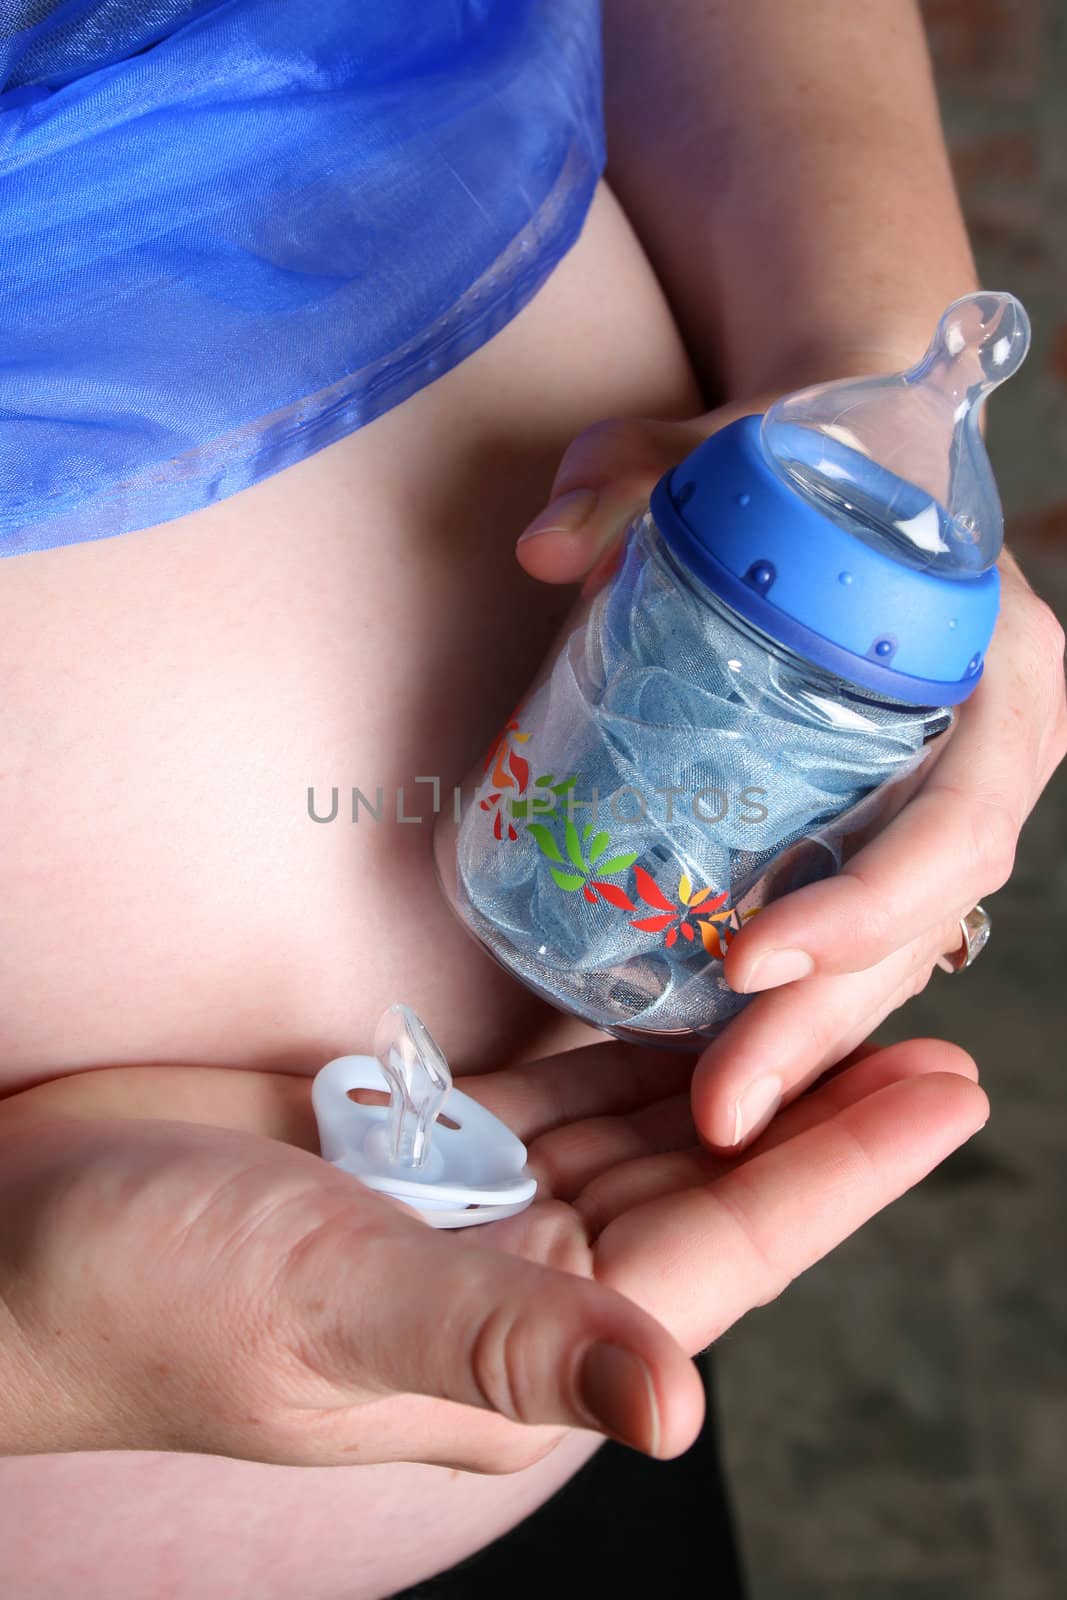 Heavily pregnant lady holding a bottle and dummy